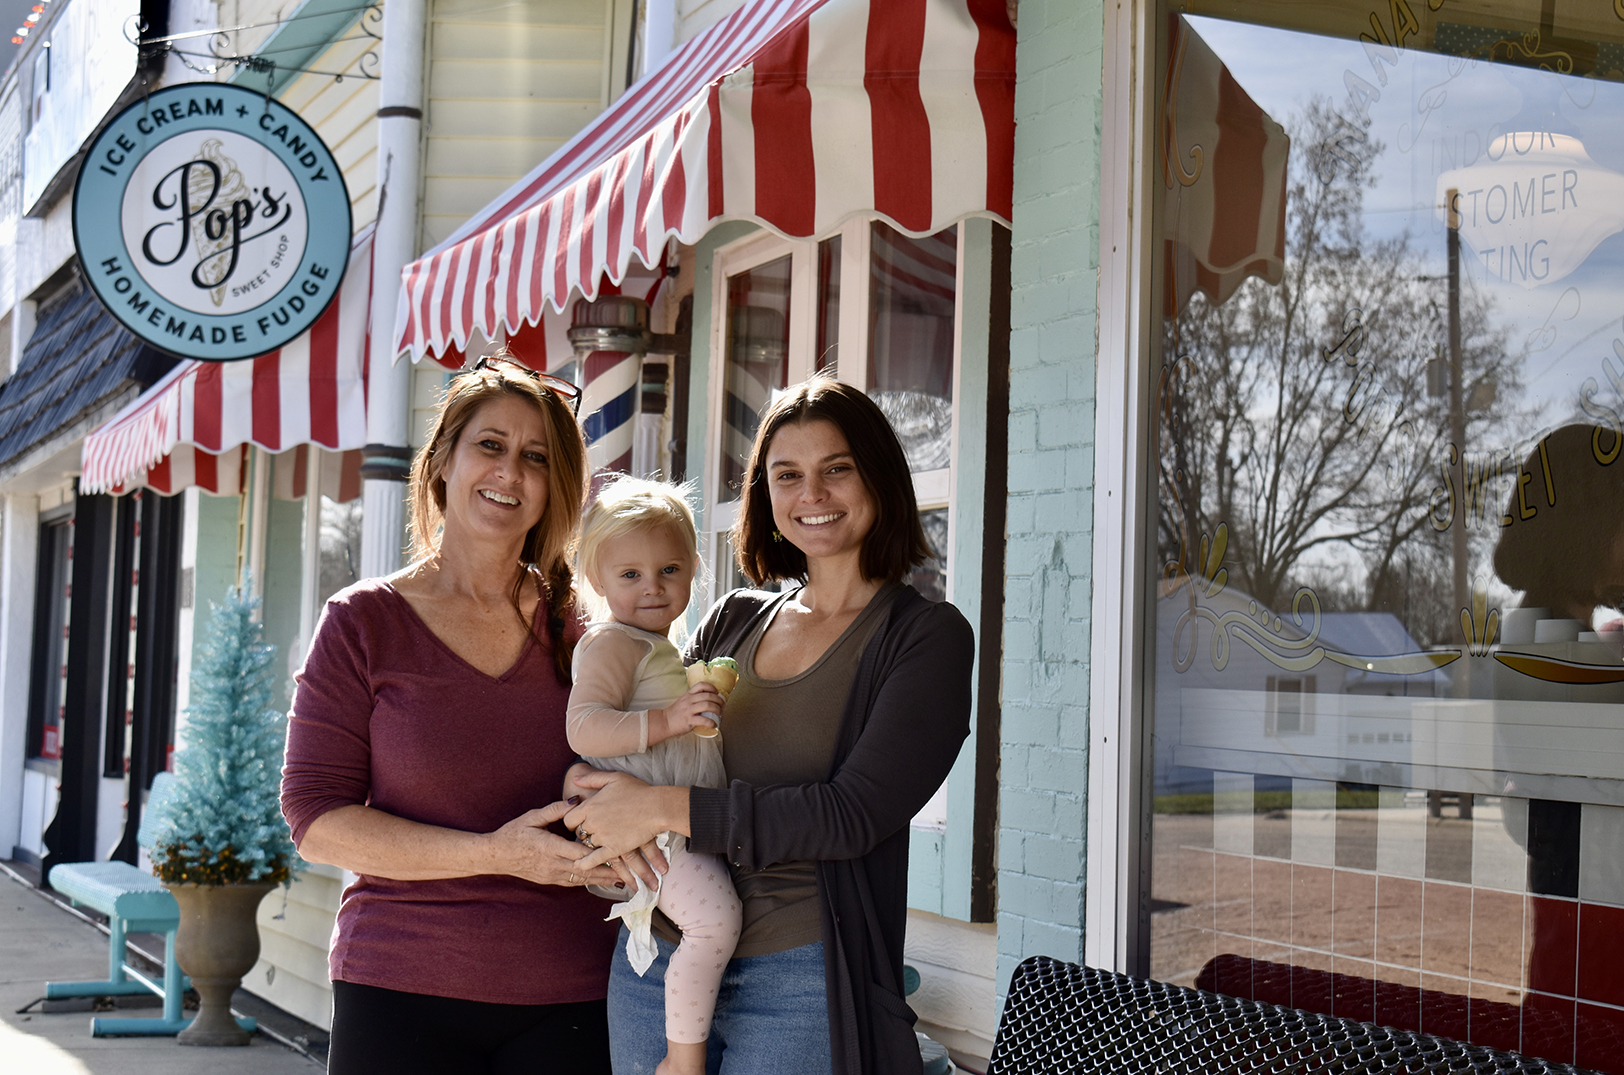 This ‘Tiny Town’ just opened on Spring Hill’s Main Street; here’s how it’s connecting kids growing up in KC’s urban sprawl